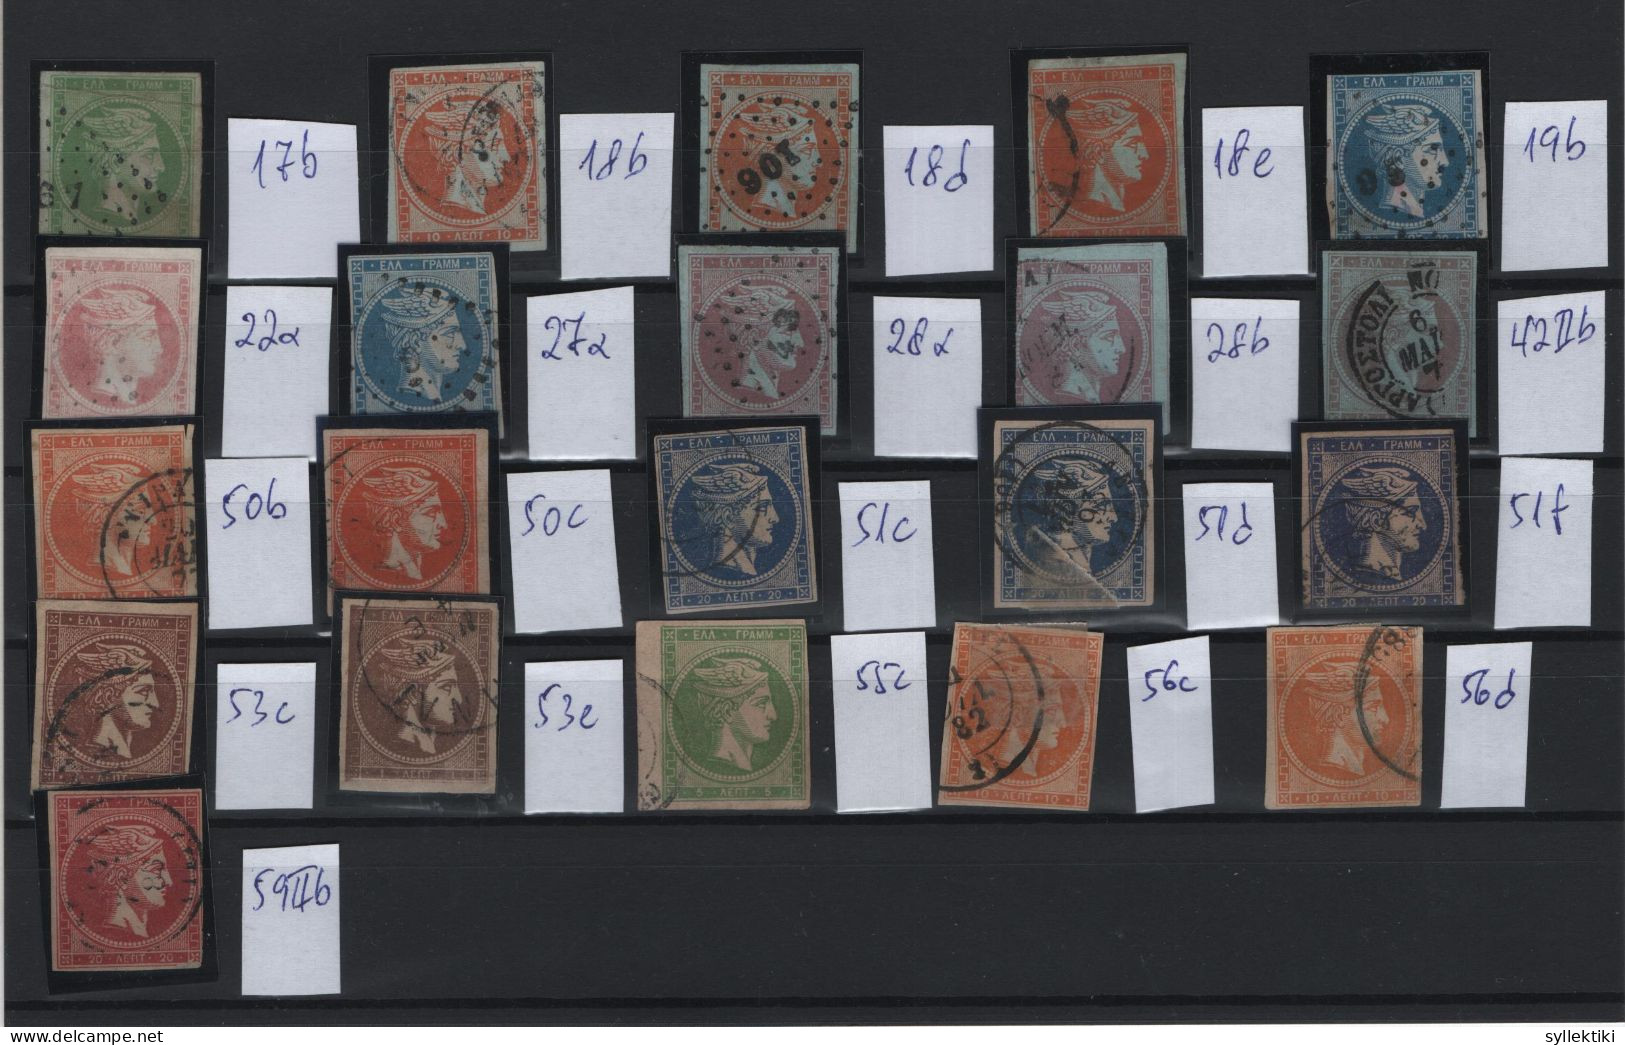 GREECE 1862- 1886 LARGE HERMES HEAD COLLECTION OF 21 DIFFERENT USED STAMPS  HELLAS CATALOGUE VALUE EURO 496.00 - Gebruikt